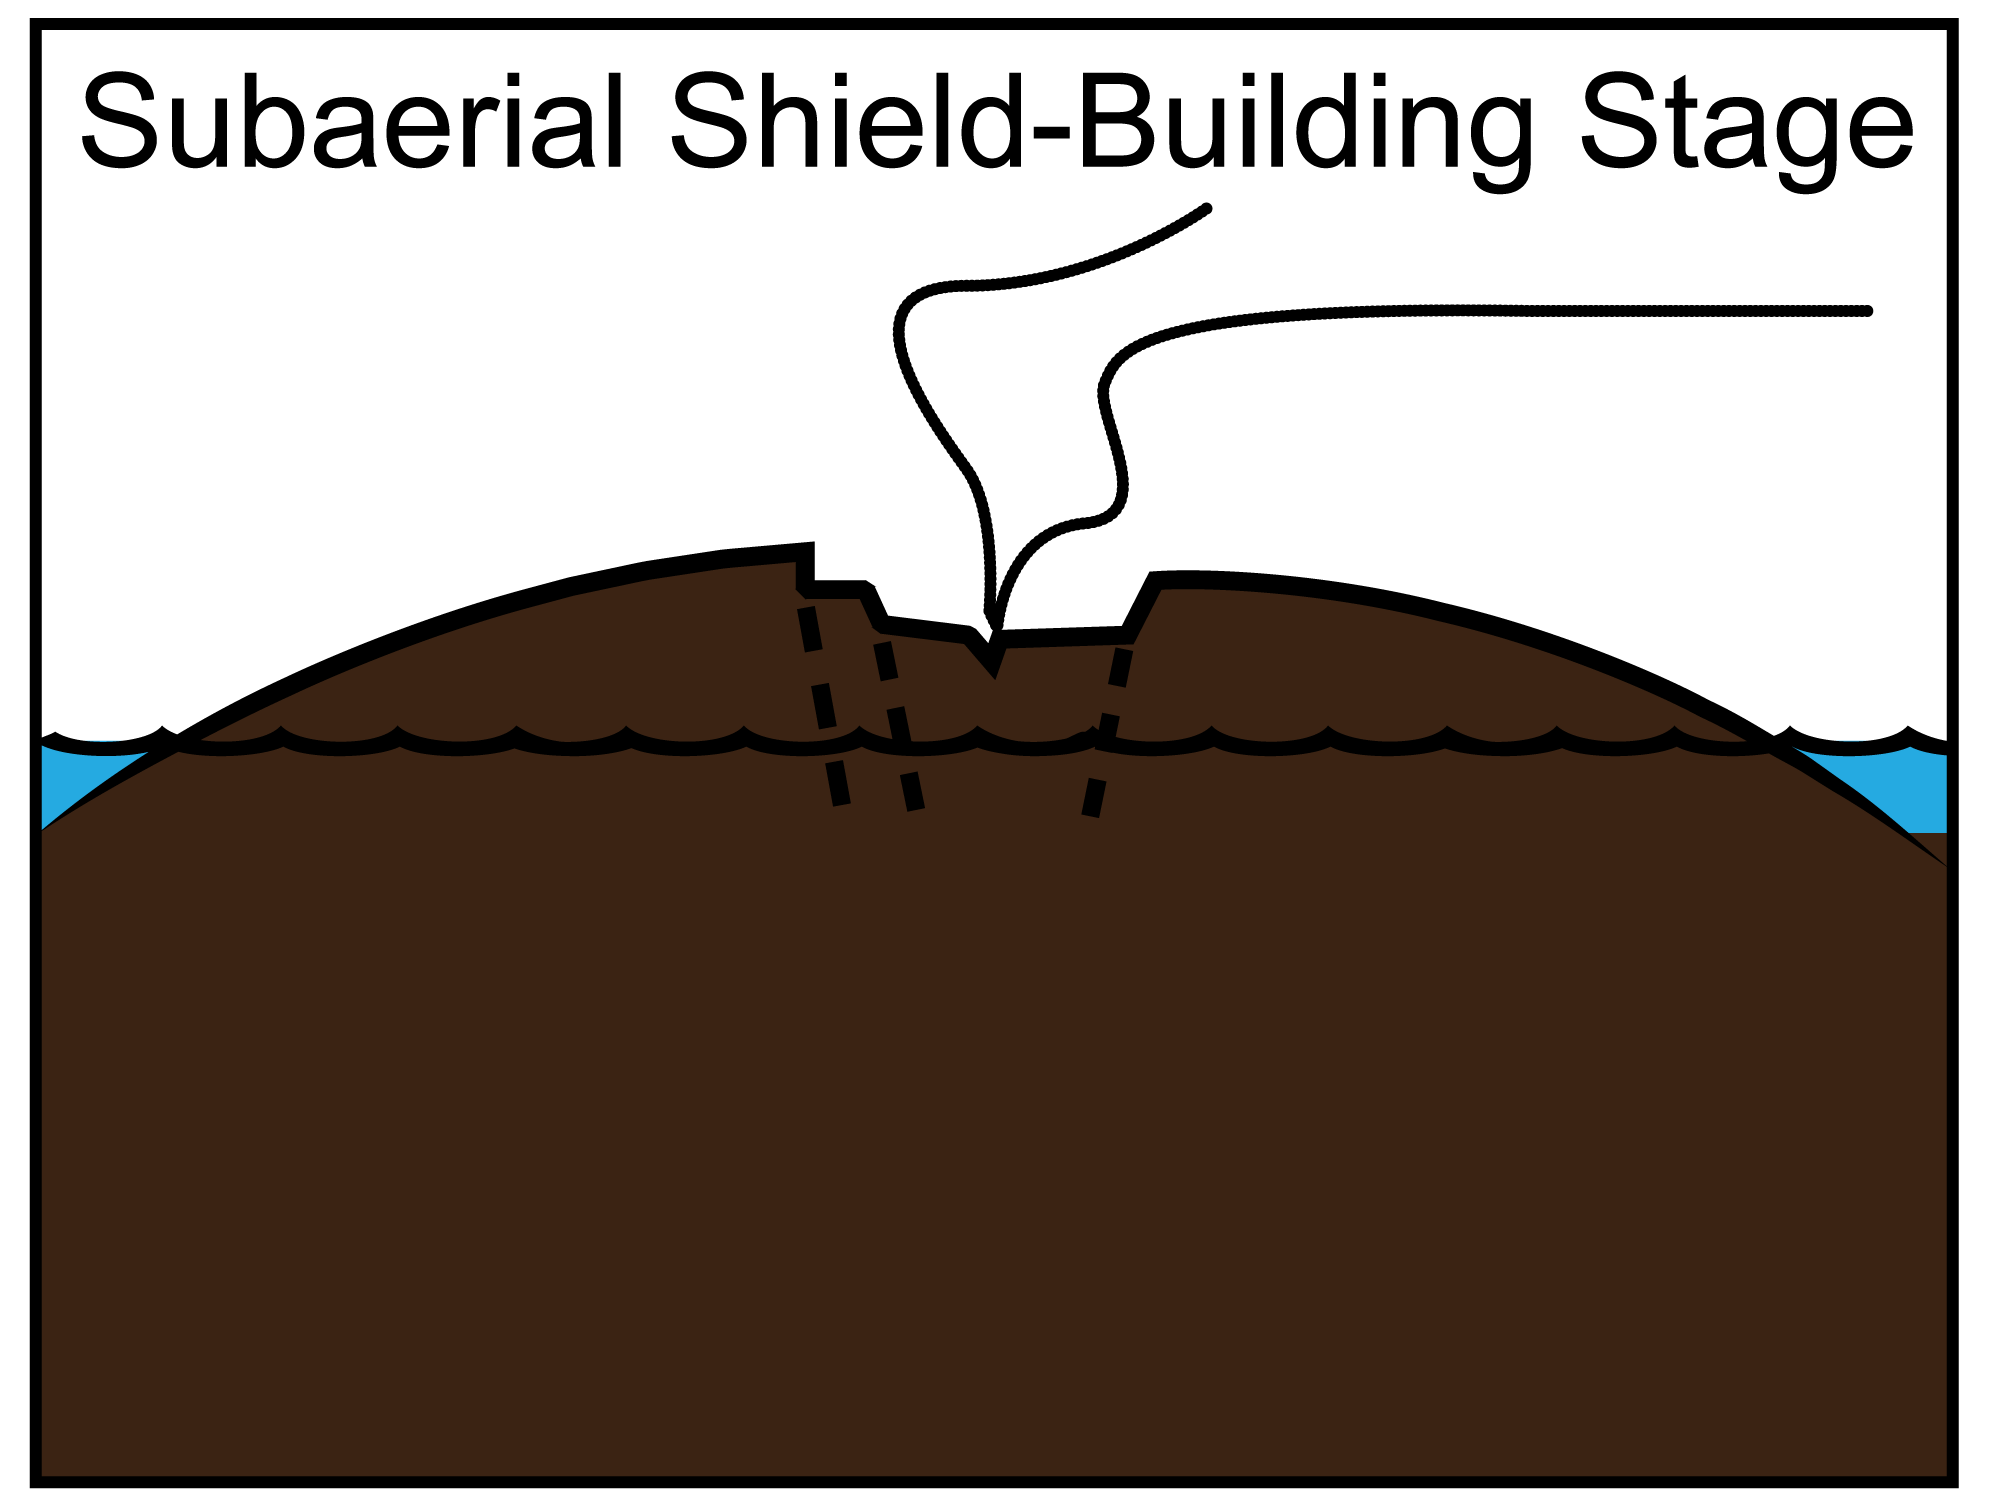 Diagram of the subaerial shield-building stage of volcano formation. In this stage, the top of the volcano is above water and a classic shield volcano has formed with a caldera.